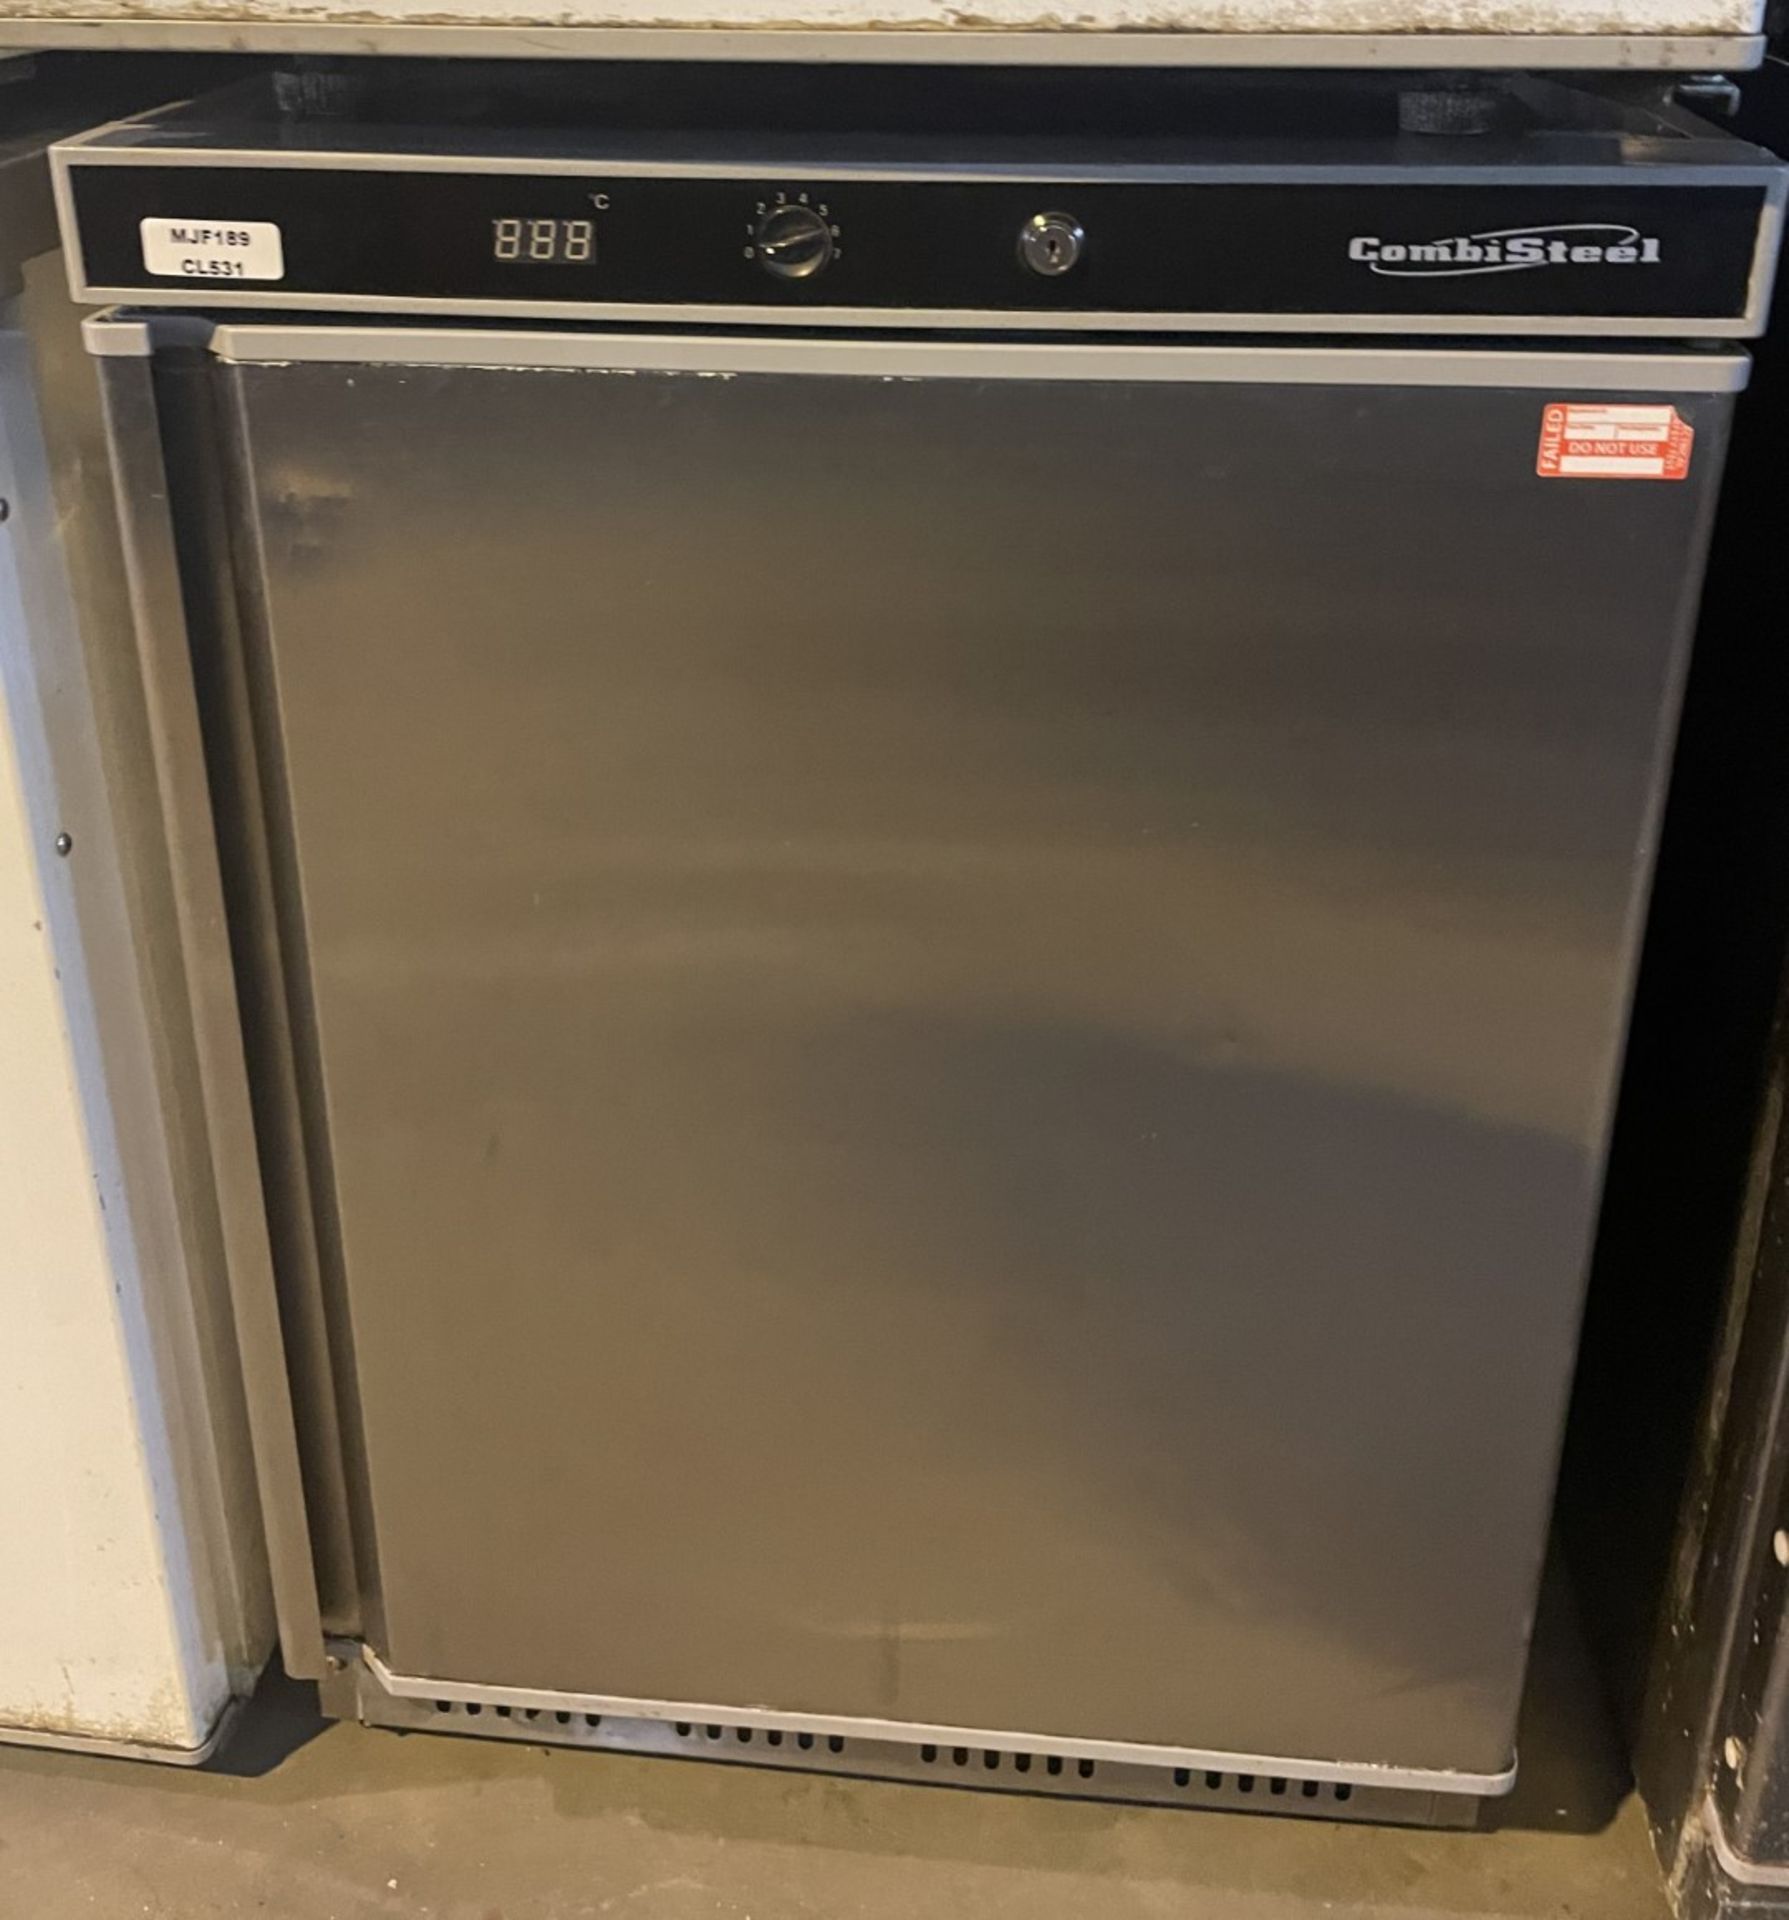 1 x CombiSteel HR200 Stainless Steel Undercounter Commercial Refrigerator - Model HR200 S/S - Dimens - Image 6 of 6